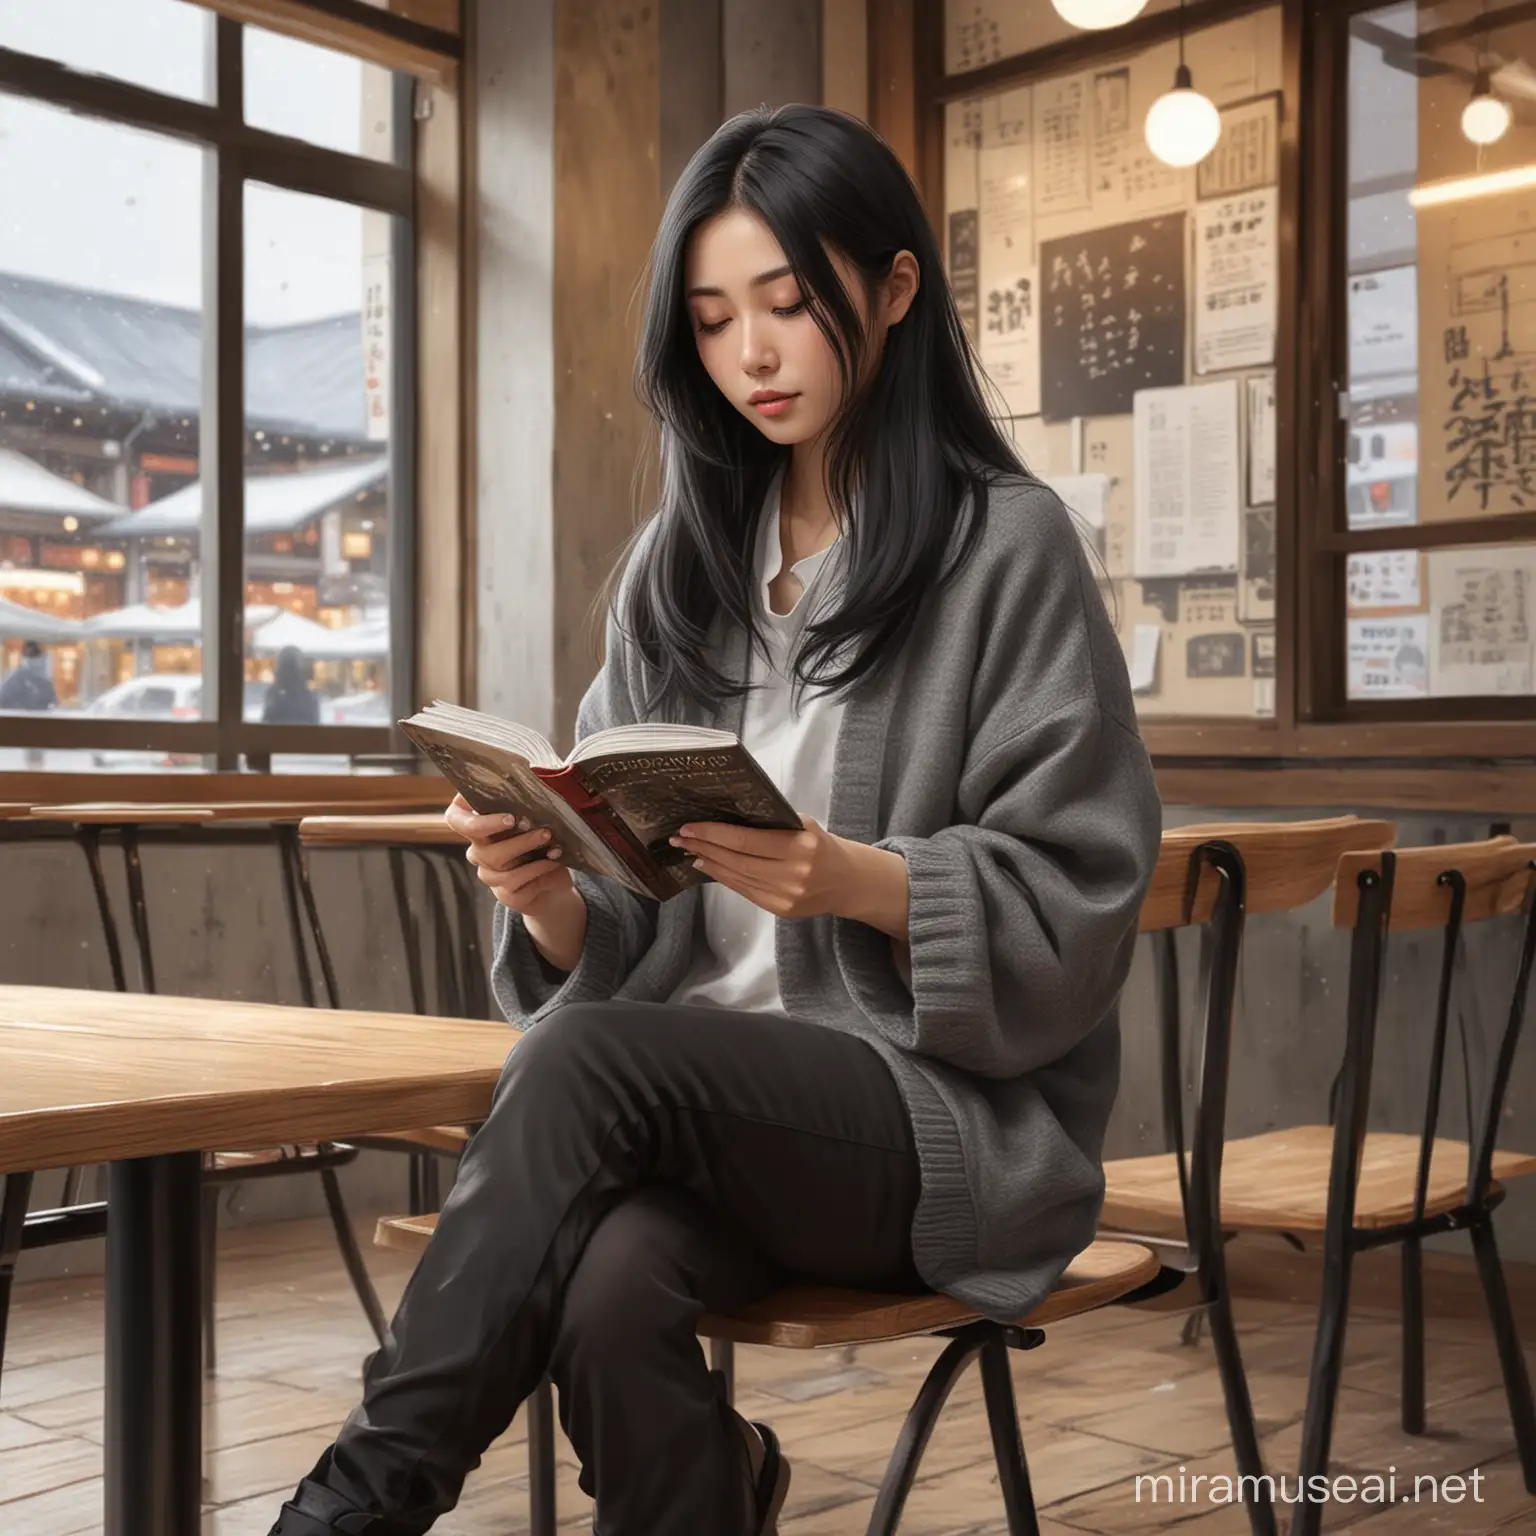 japanese woman with long black hair, wearing casual winter clothes, sitting inside the cafe, reading book, draw in digital art